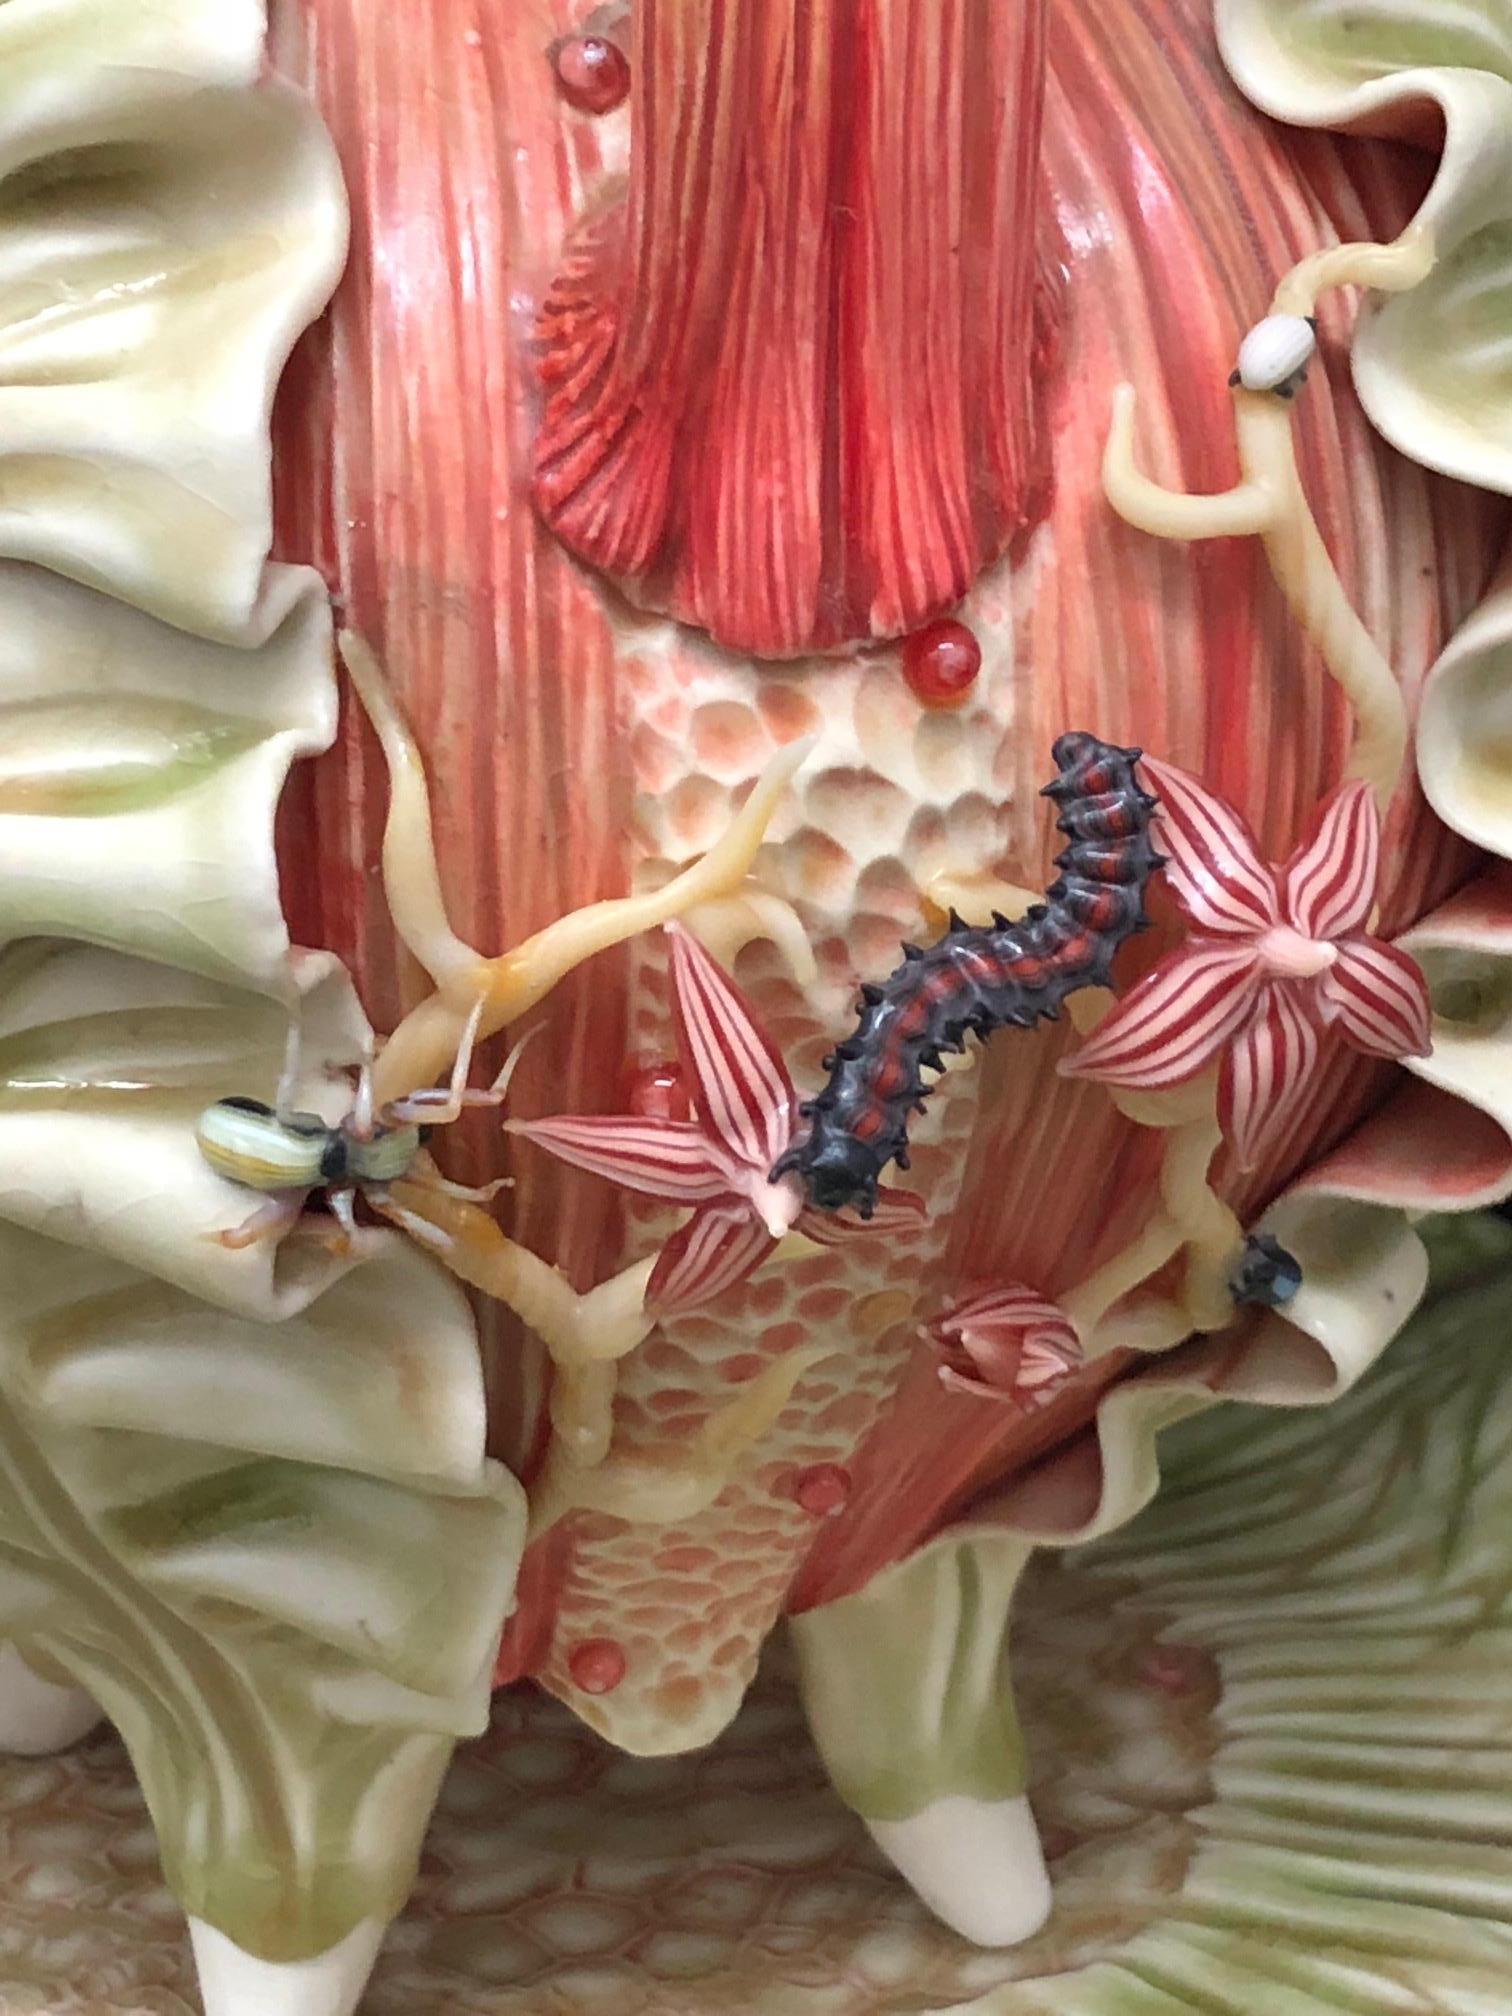 Bonnie Seeman grew up in Miami, Florida with a propensity towards anatomy illustration and the dazzling colors and rich foliage of the Miami landscape.  Developing her technique with porcelain and glass, Seeman channeled her inspirations; resulting